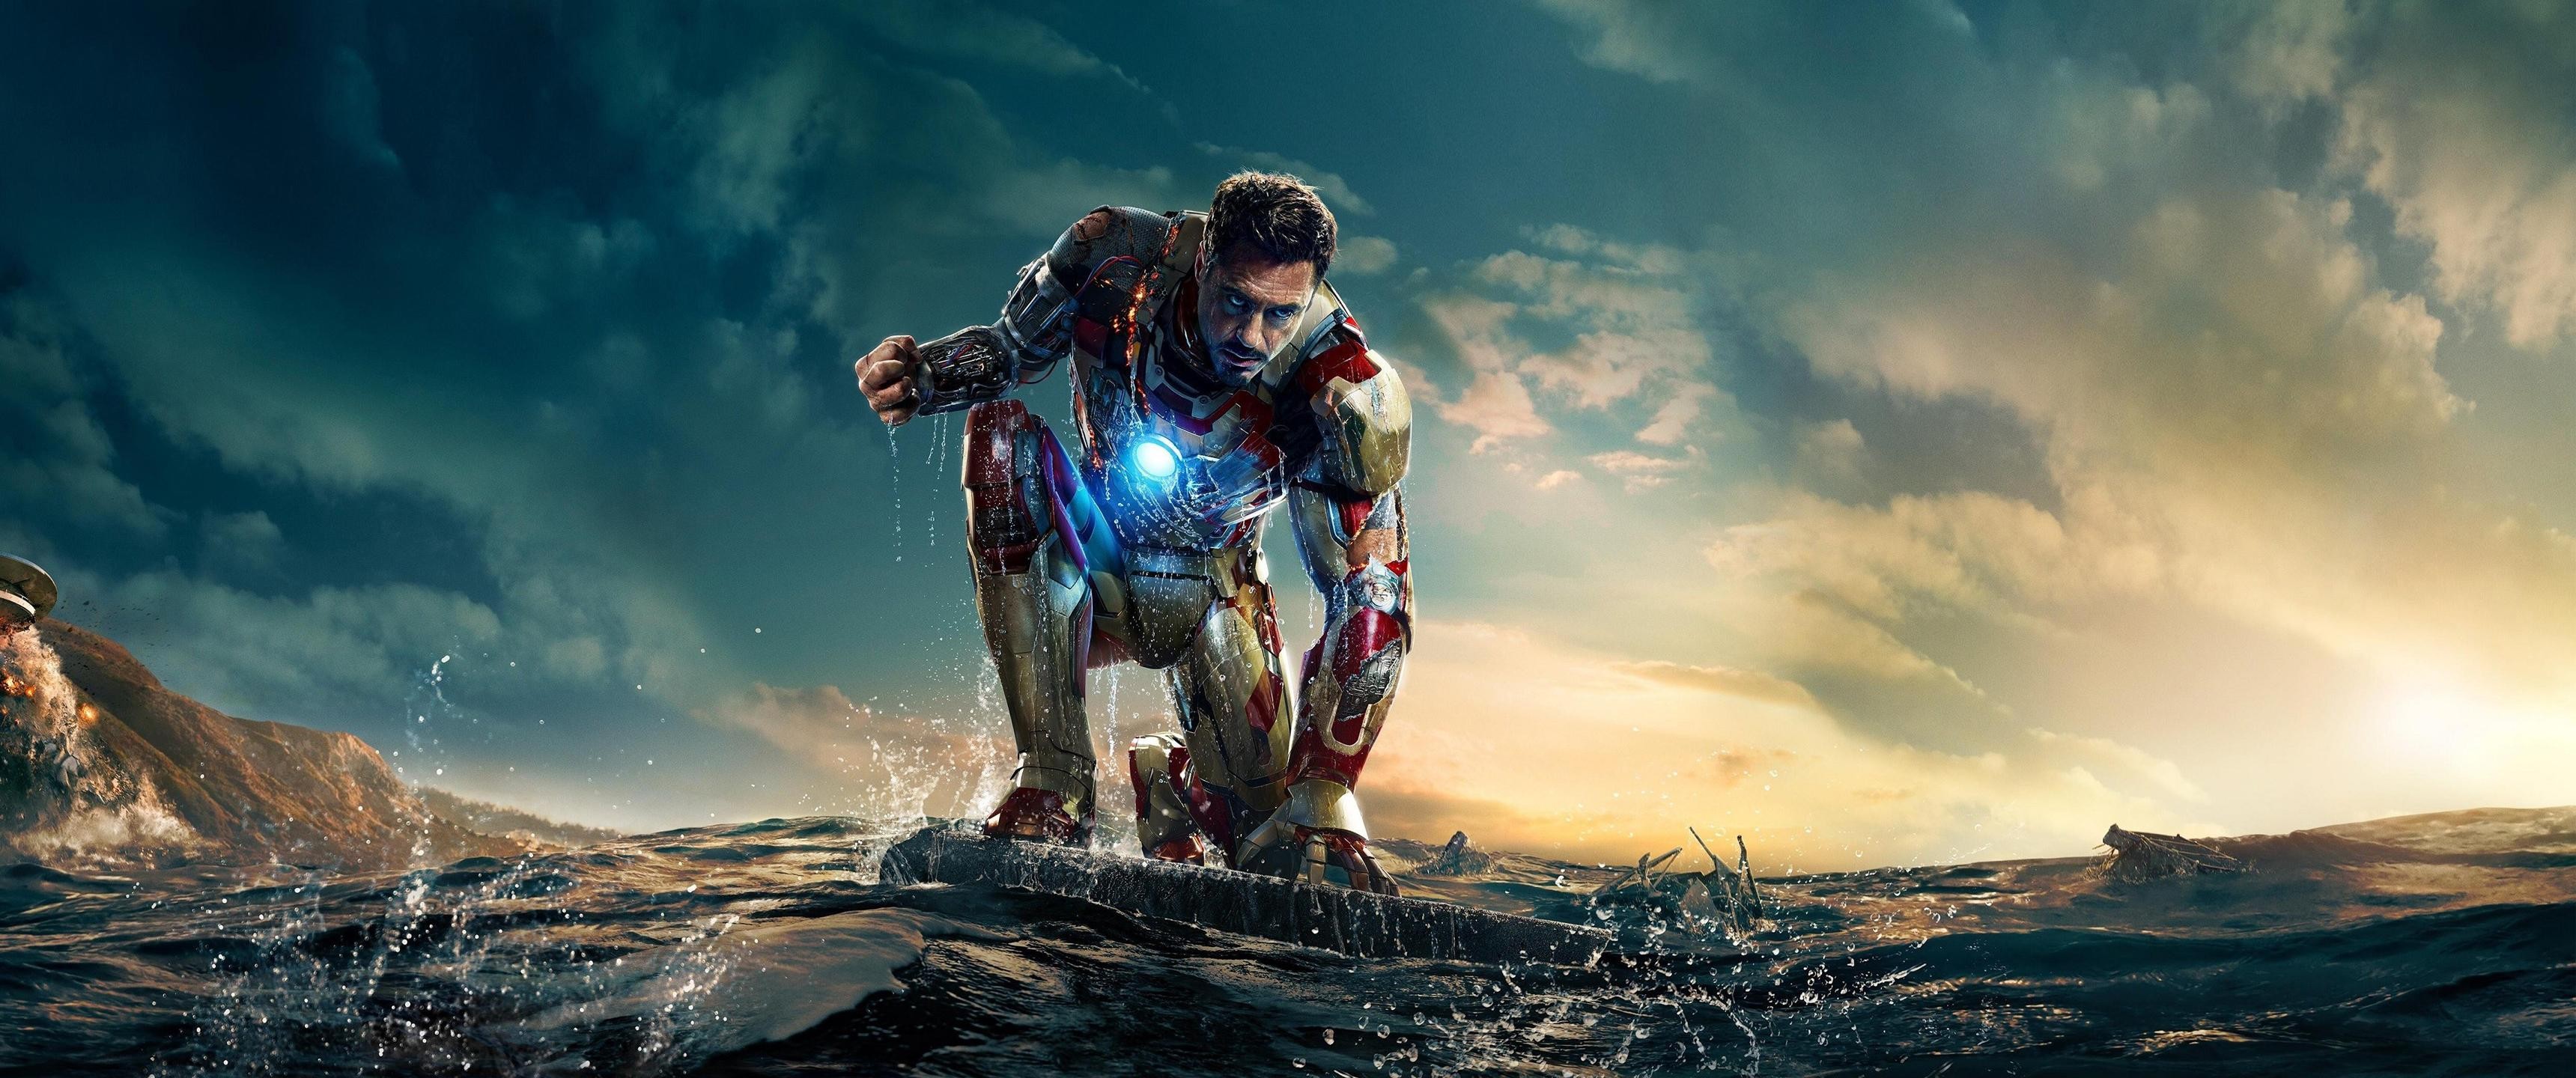 Iron Man Wallpapers HD / Desktop and Mobile Backgrounds